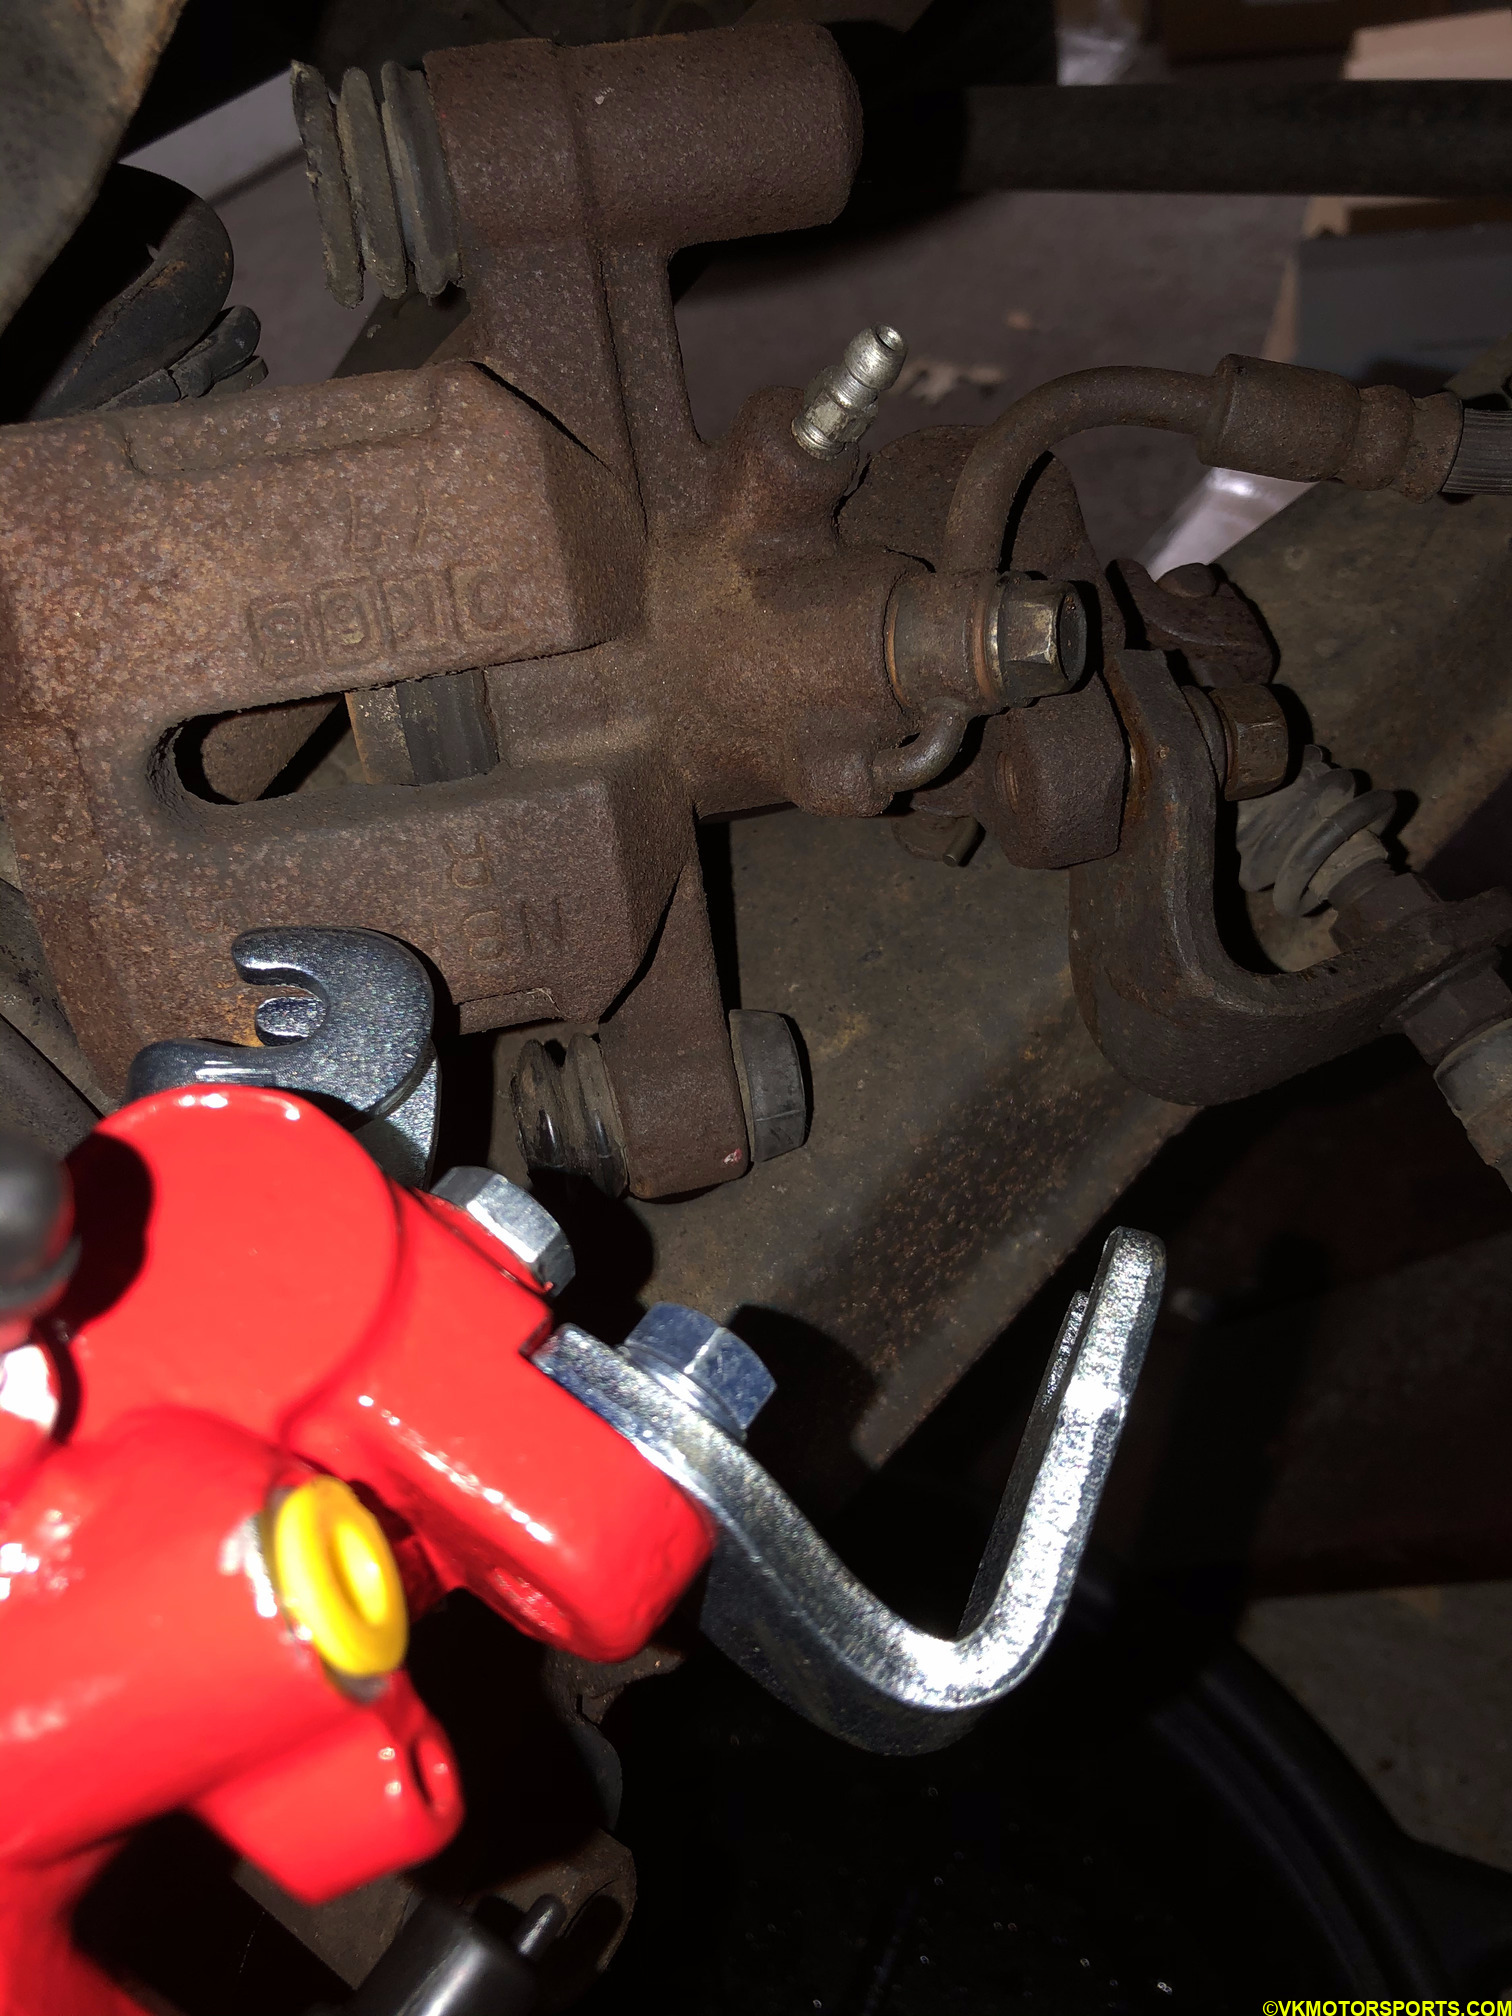 Compare brake lines on the old rear caliper on the driver's side